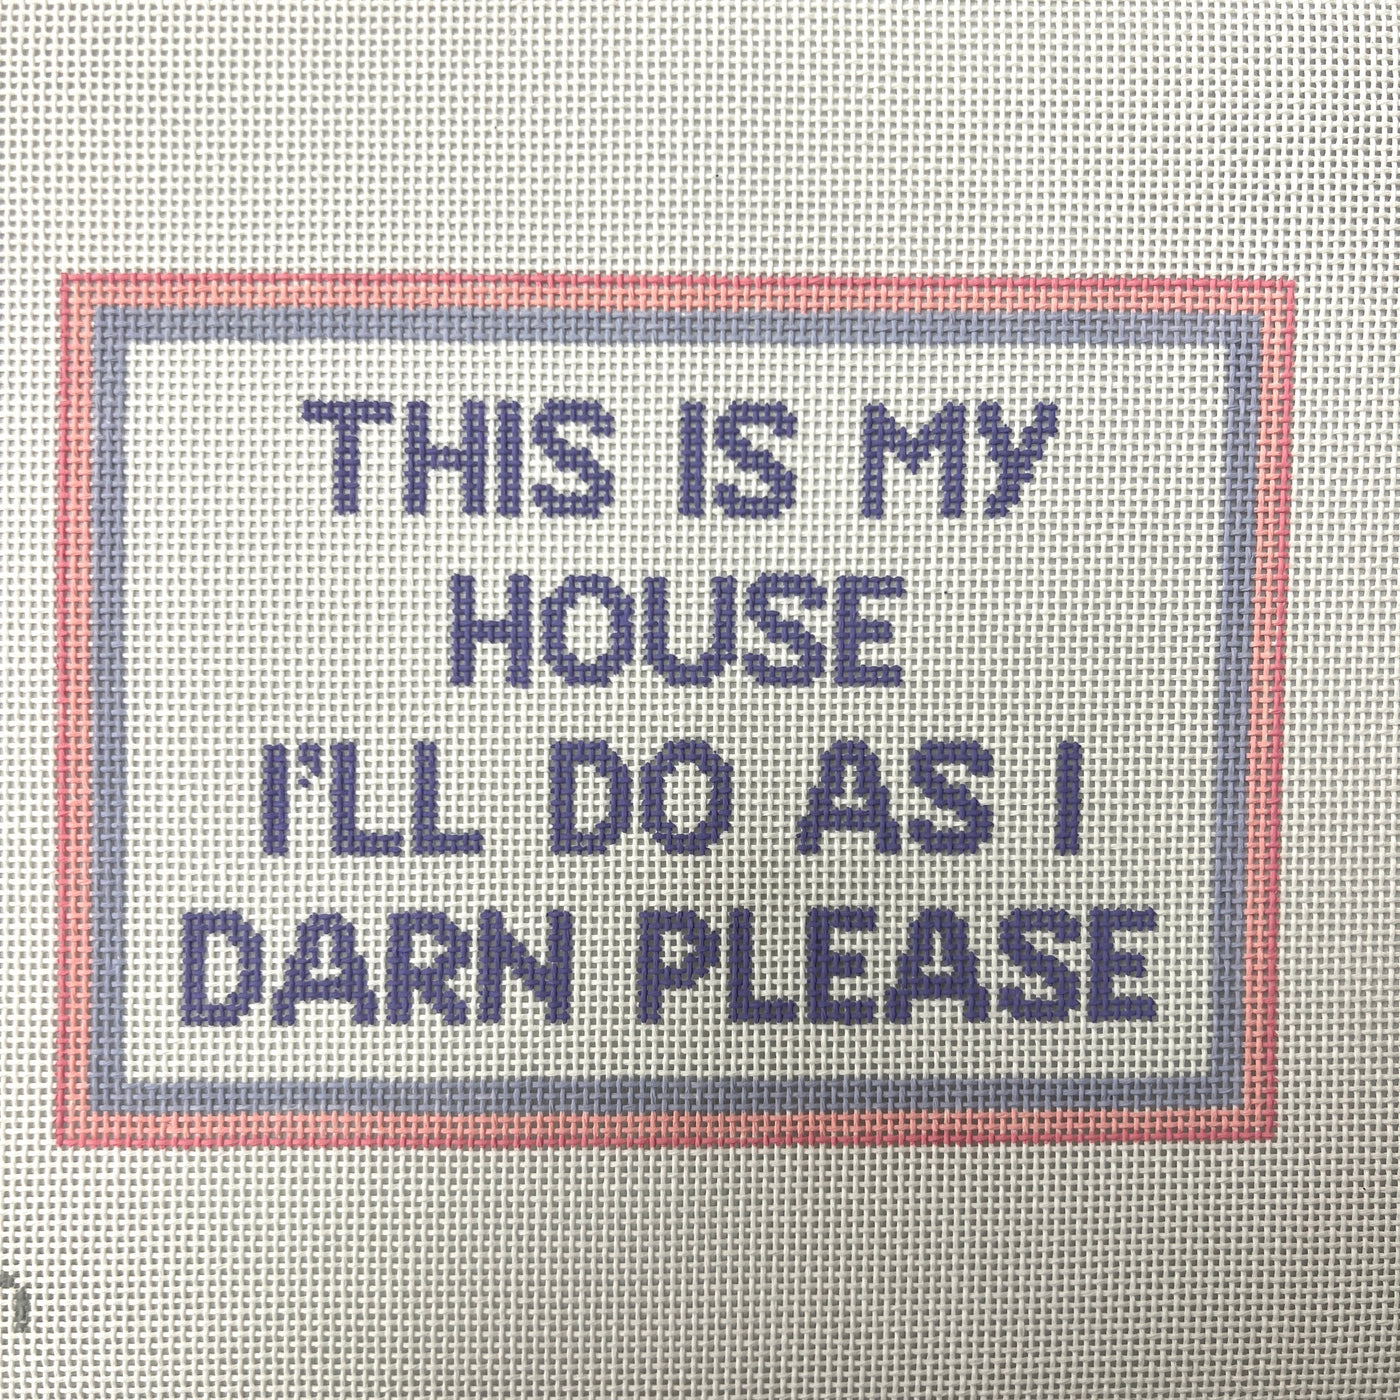 Do as I Darn Please in My House Needlepoint Canvas